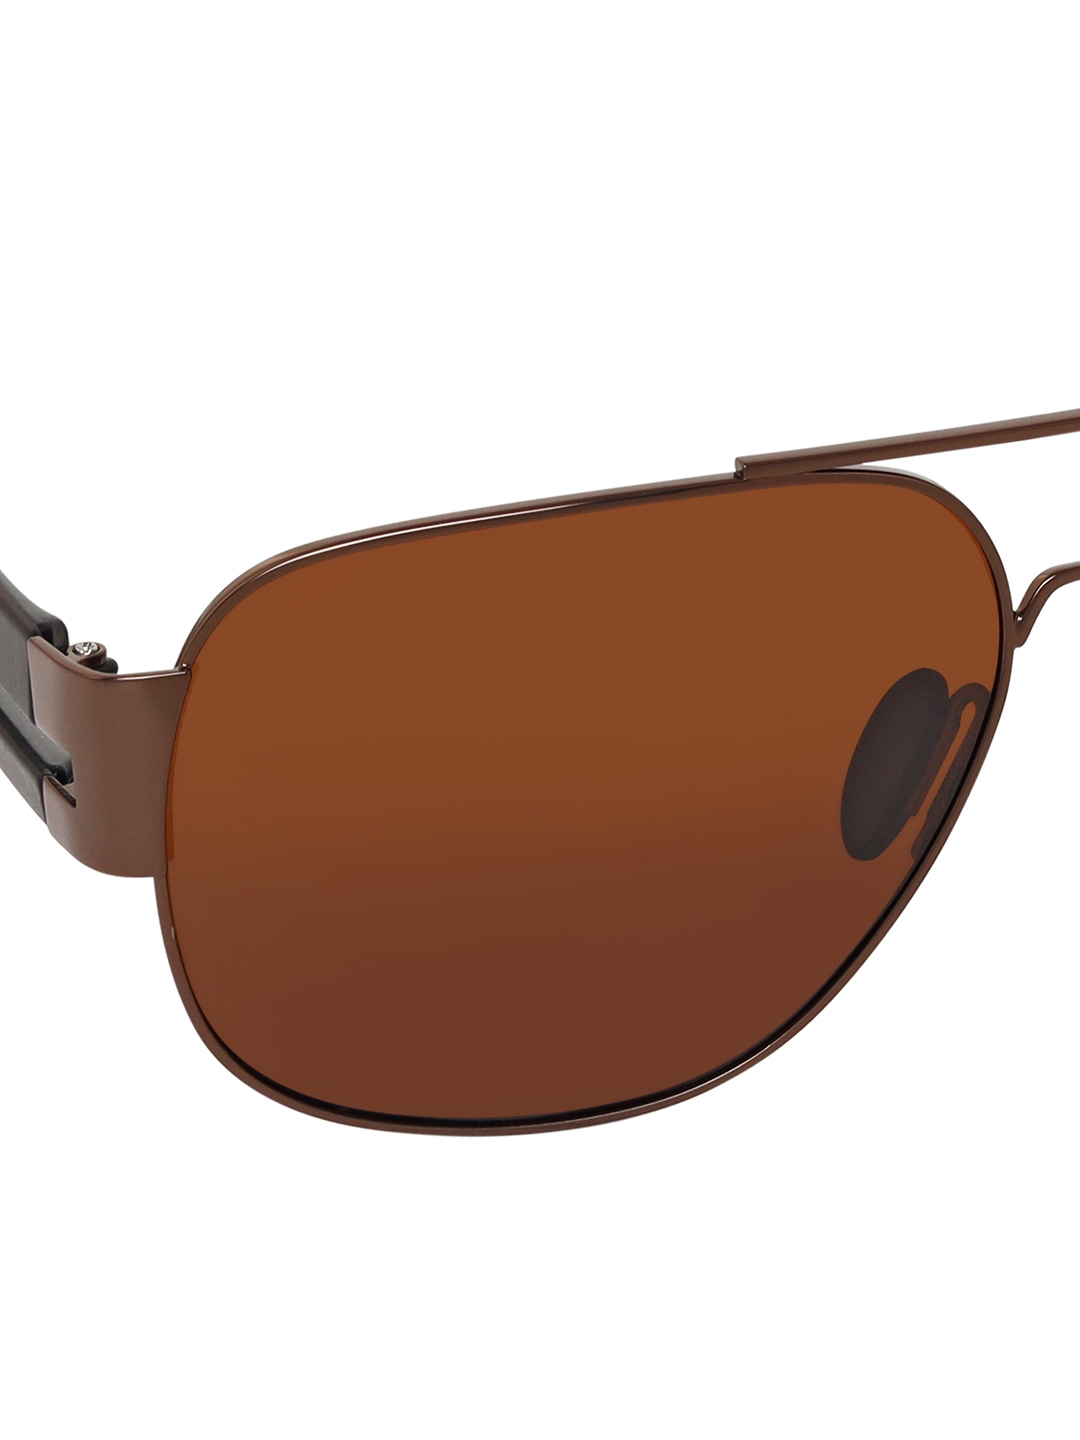 Aeropostale | Aeropostale AERO_SUN_201919_C2 Summer Sunglasses for Men comes with UV protection Polarized Anti Glare lens Mens trending Summer Style Full Brown Shaded Lens with Black Acrylic Frame. 3